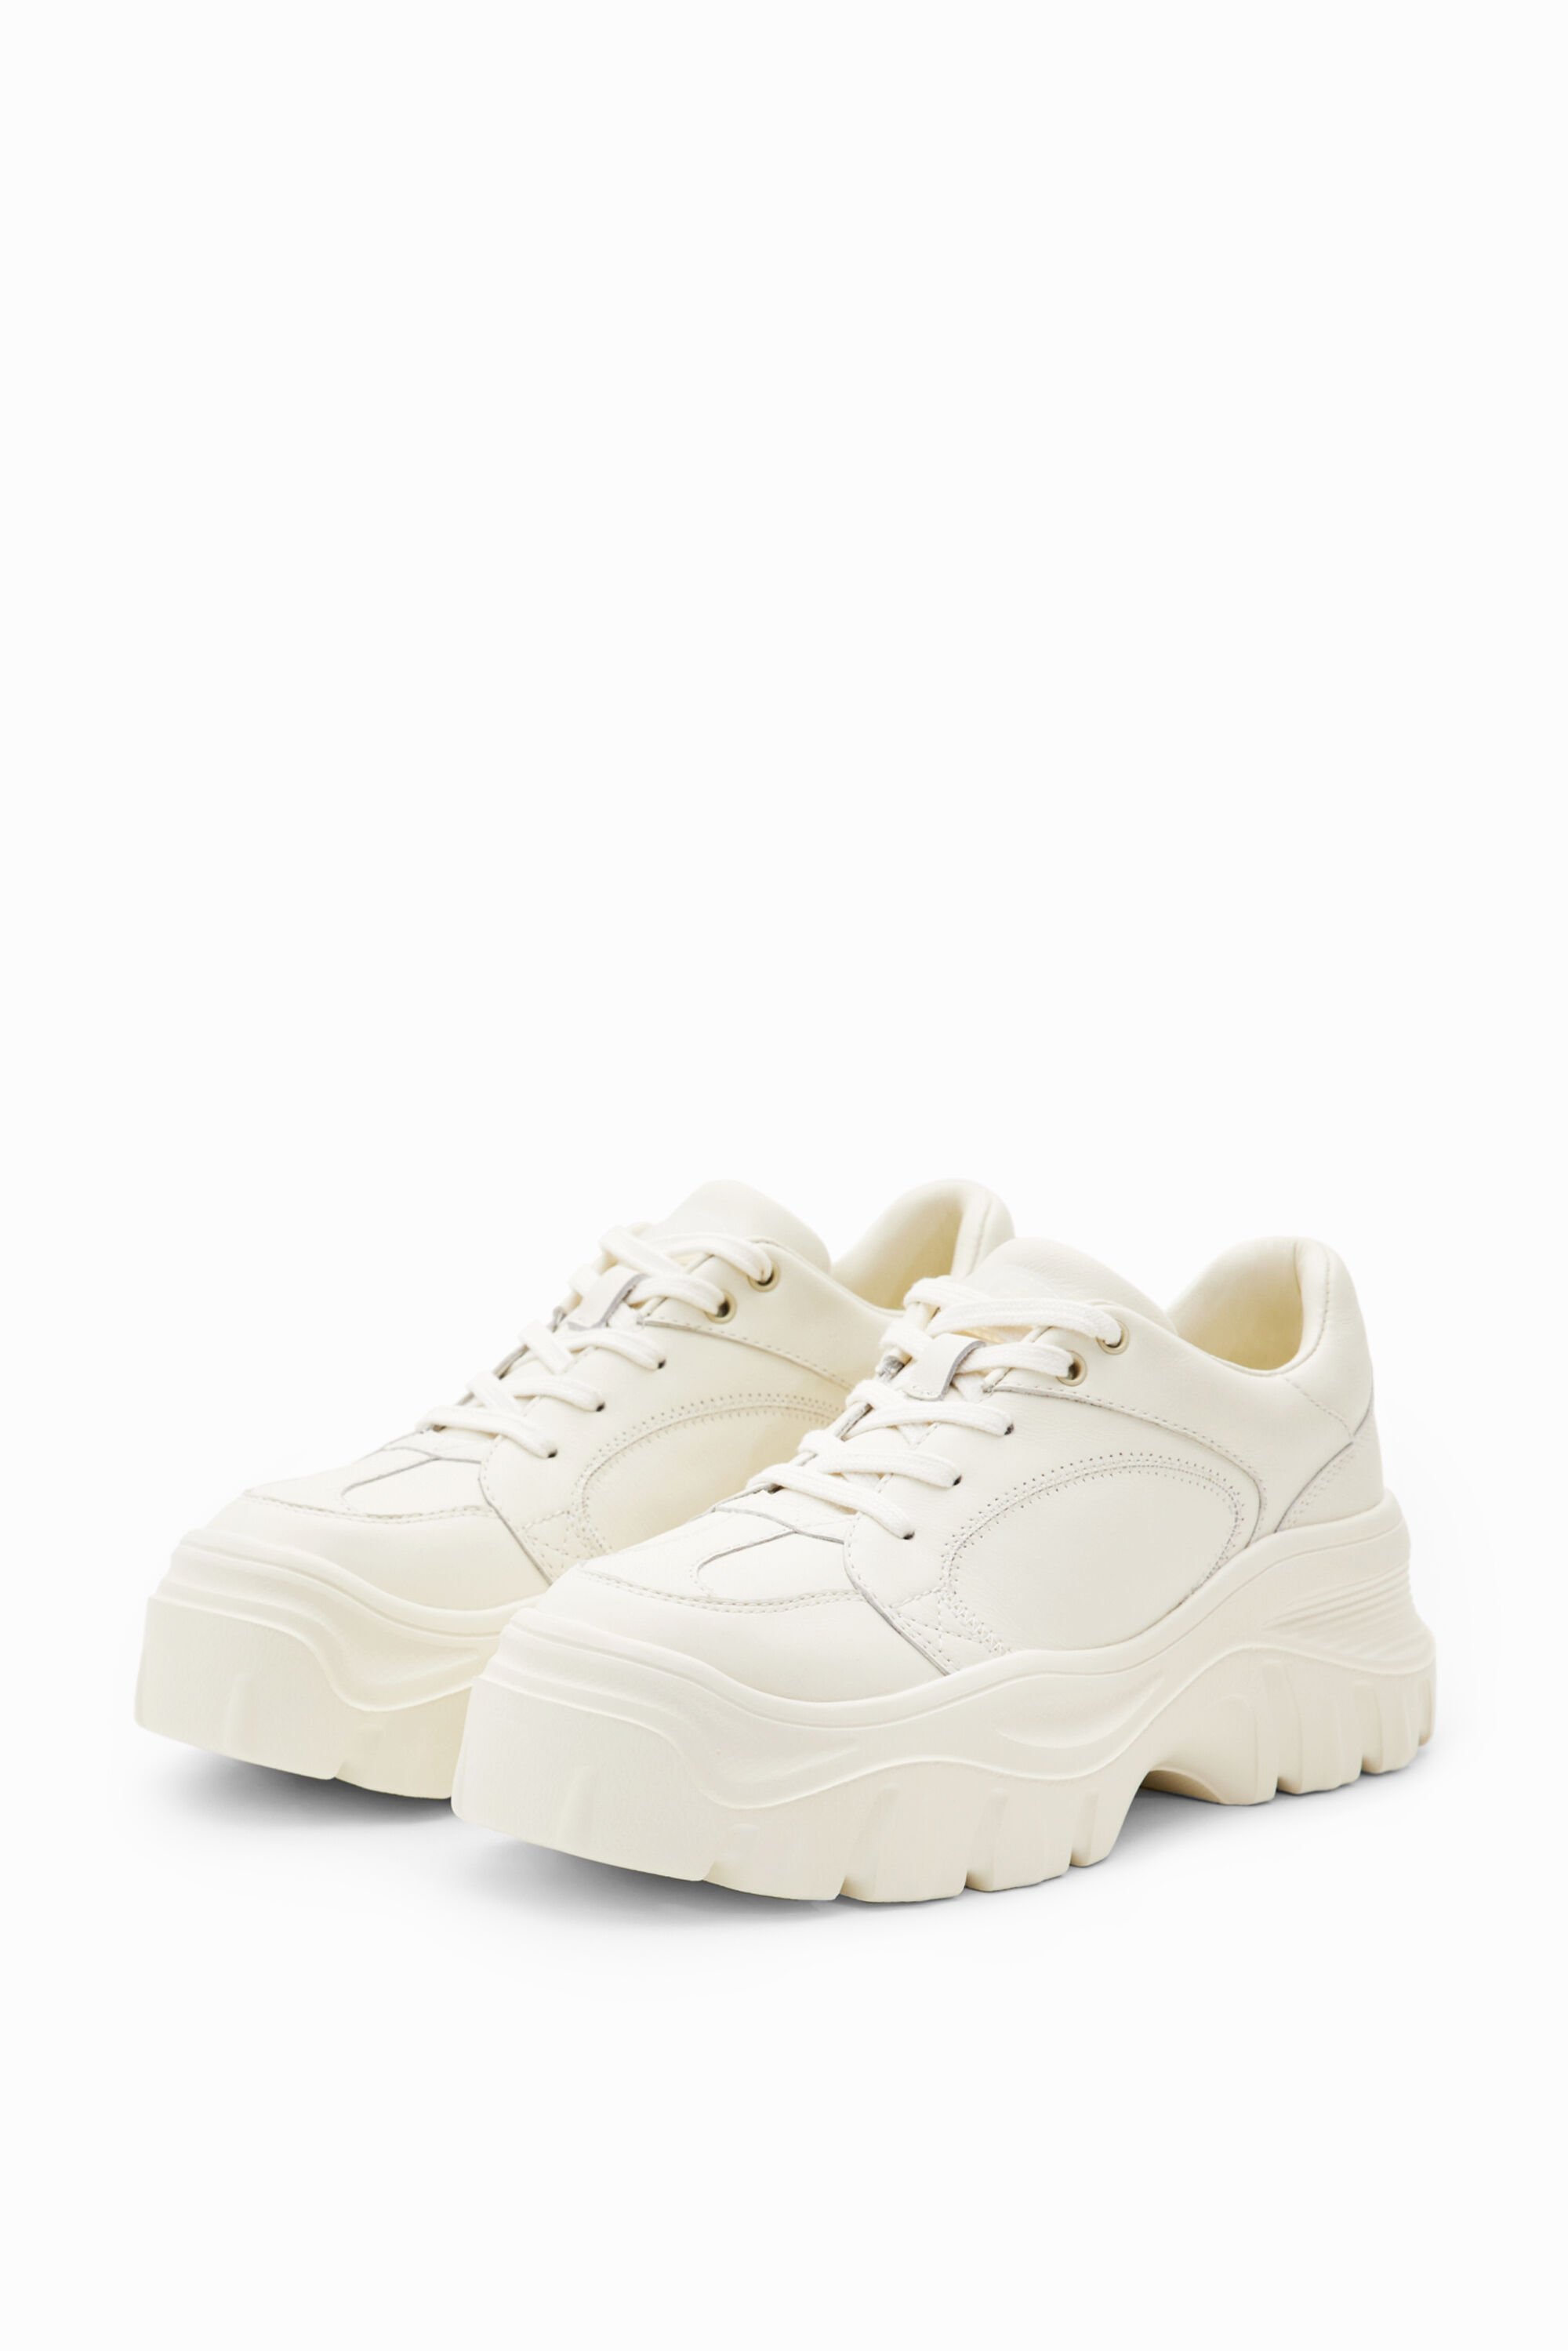 Chunky leather sneakers - WHITE - 41